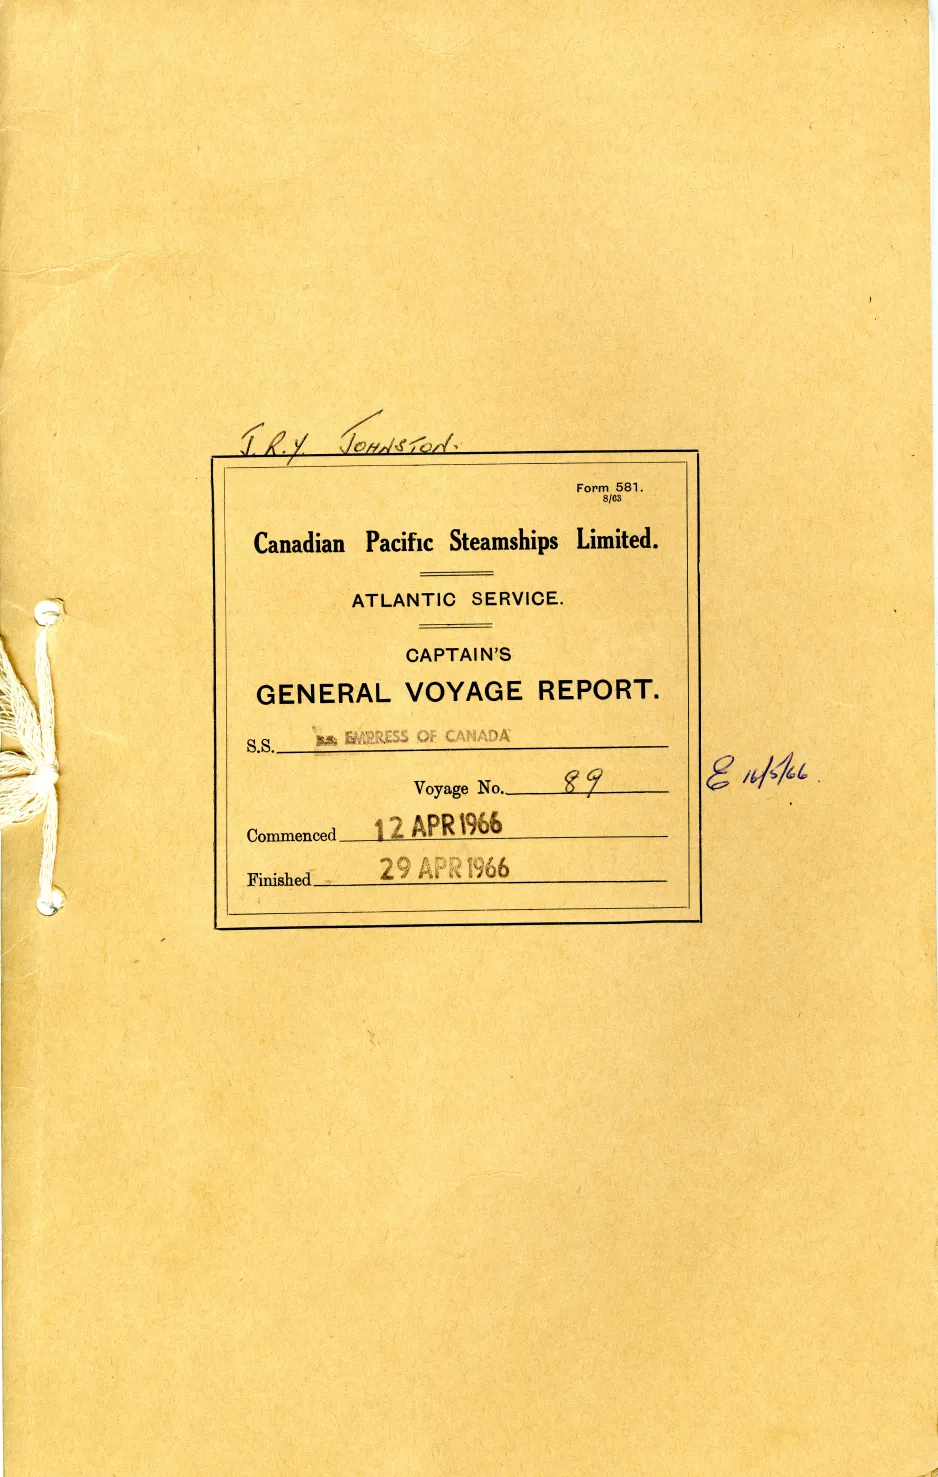 Cover of the 1966 Captain's General Voyage Report for the Empress of Canada